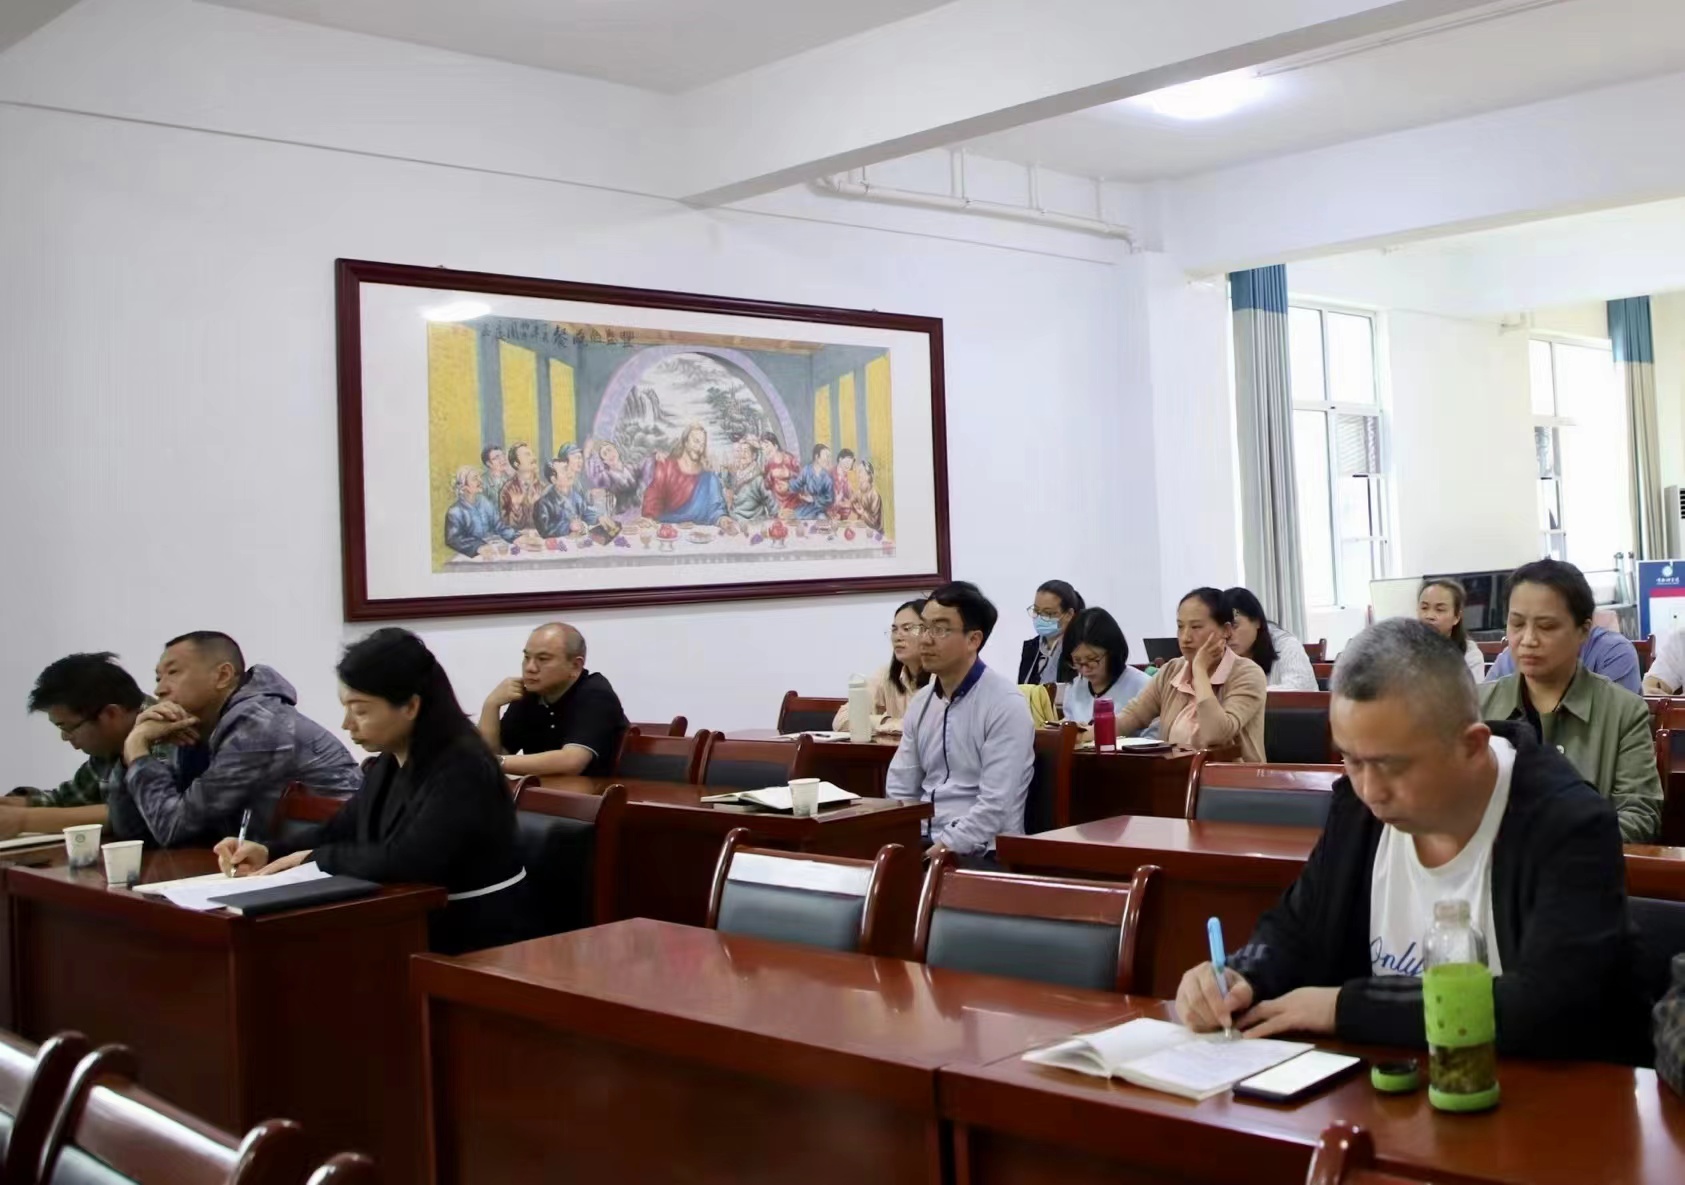 Hubei Provincial CC&TSPM held a meeting among all pastoral staff and a hearing on the decoration of staff's relocation housing in Wuhan City, Hubei Province, on April 16 and 19, 2024.